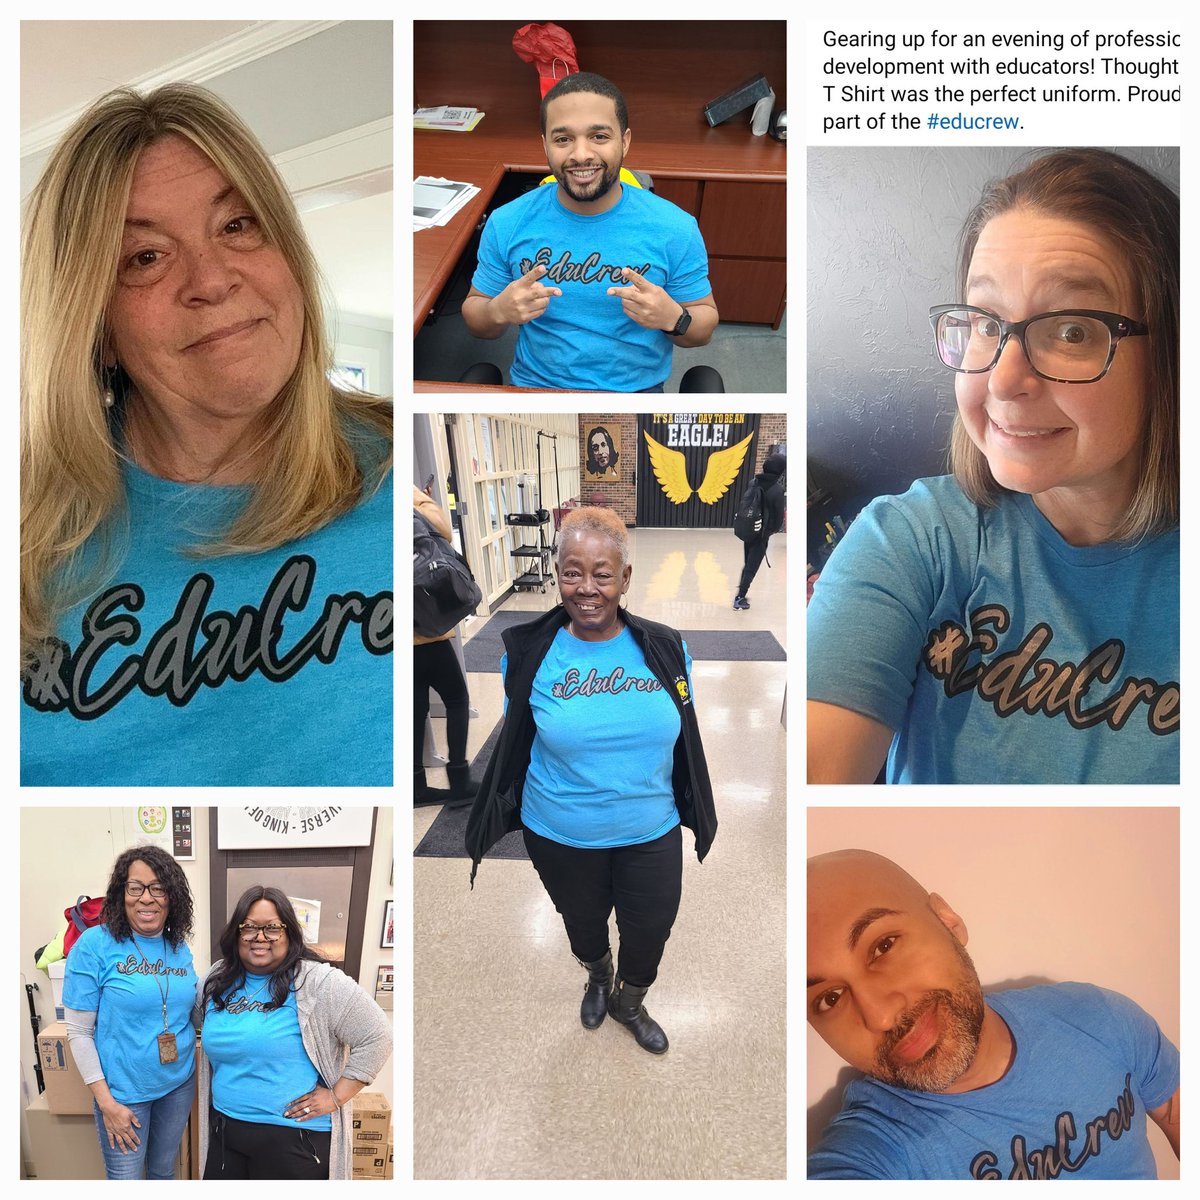 There's still time to nominate a #teacher to win one of these amazing #EduCrew tees as we celebrate #TeacherAppreciationWeek.

Simply like the post, RT, and tag your nominee. Winners will be picked at the end of the month. 

#teachertwitter
#edutwitter